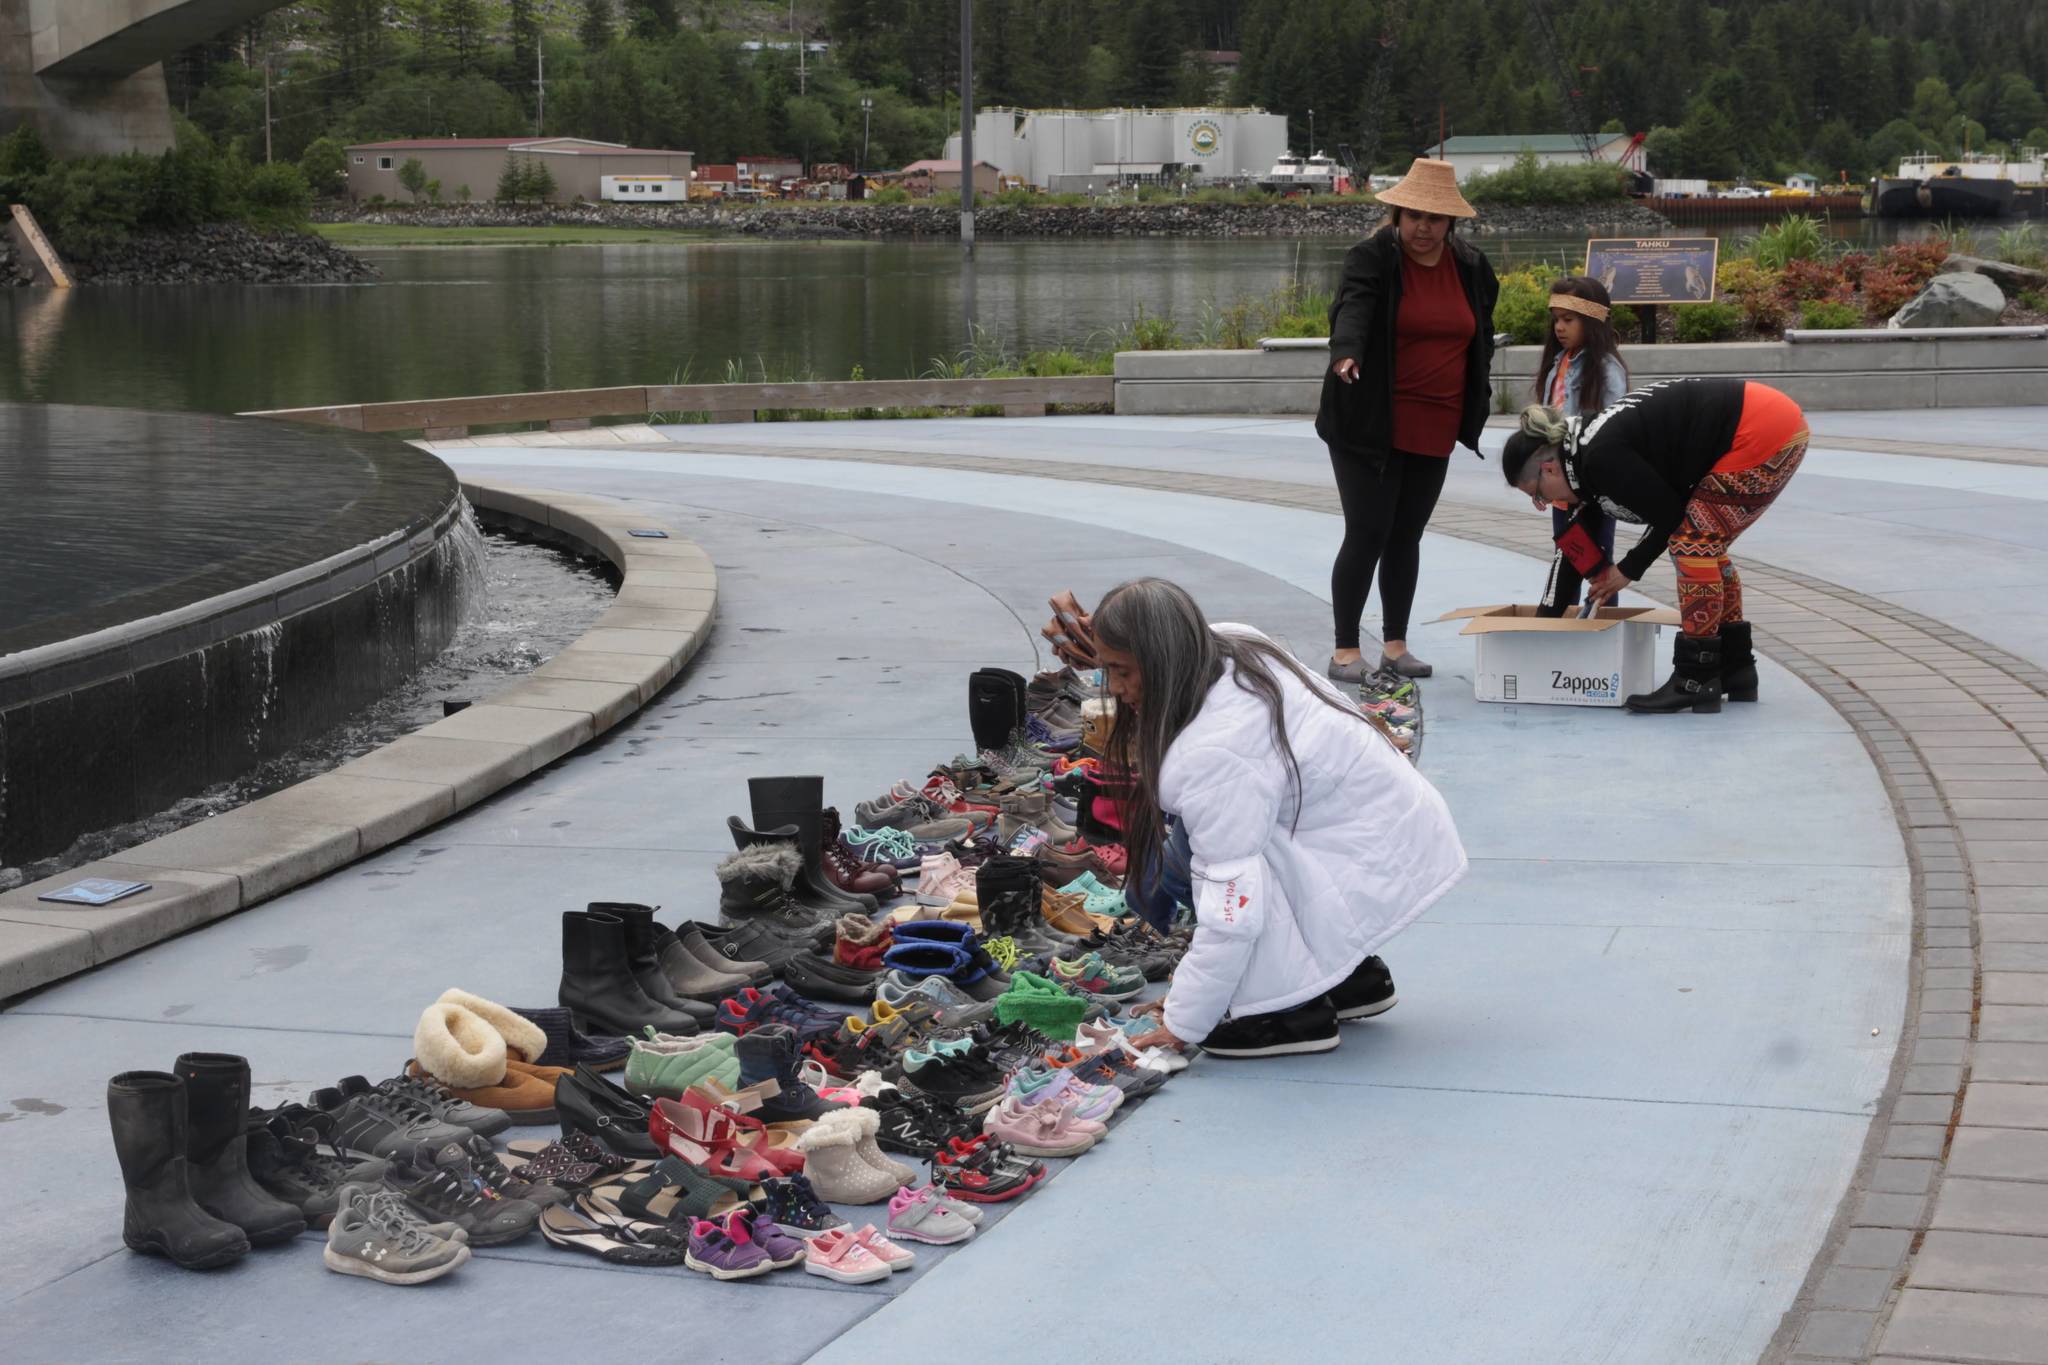 Michael S. Lockett / Juneau Empire
Juneau residents place hundreds of pairs of children’s shoes in front of the statue at Mayor Bill Overstreet Park on Saturday as they mourned for the 215 dead children uncovered at a residential school in Canada.